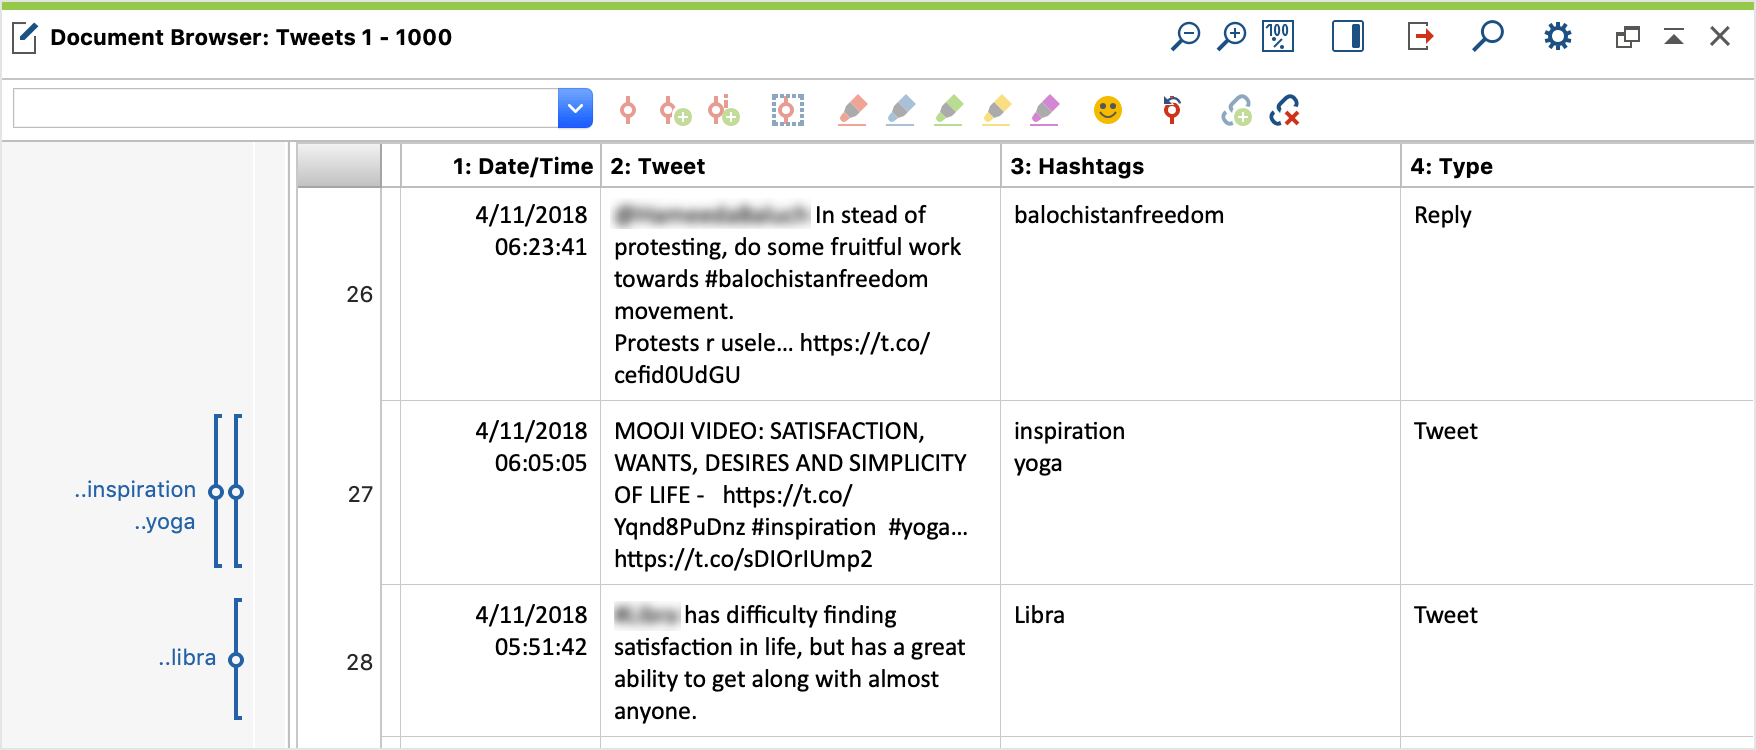 Table document with Twitter data in the Document Browser